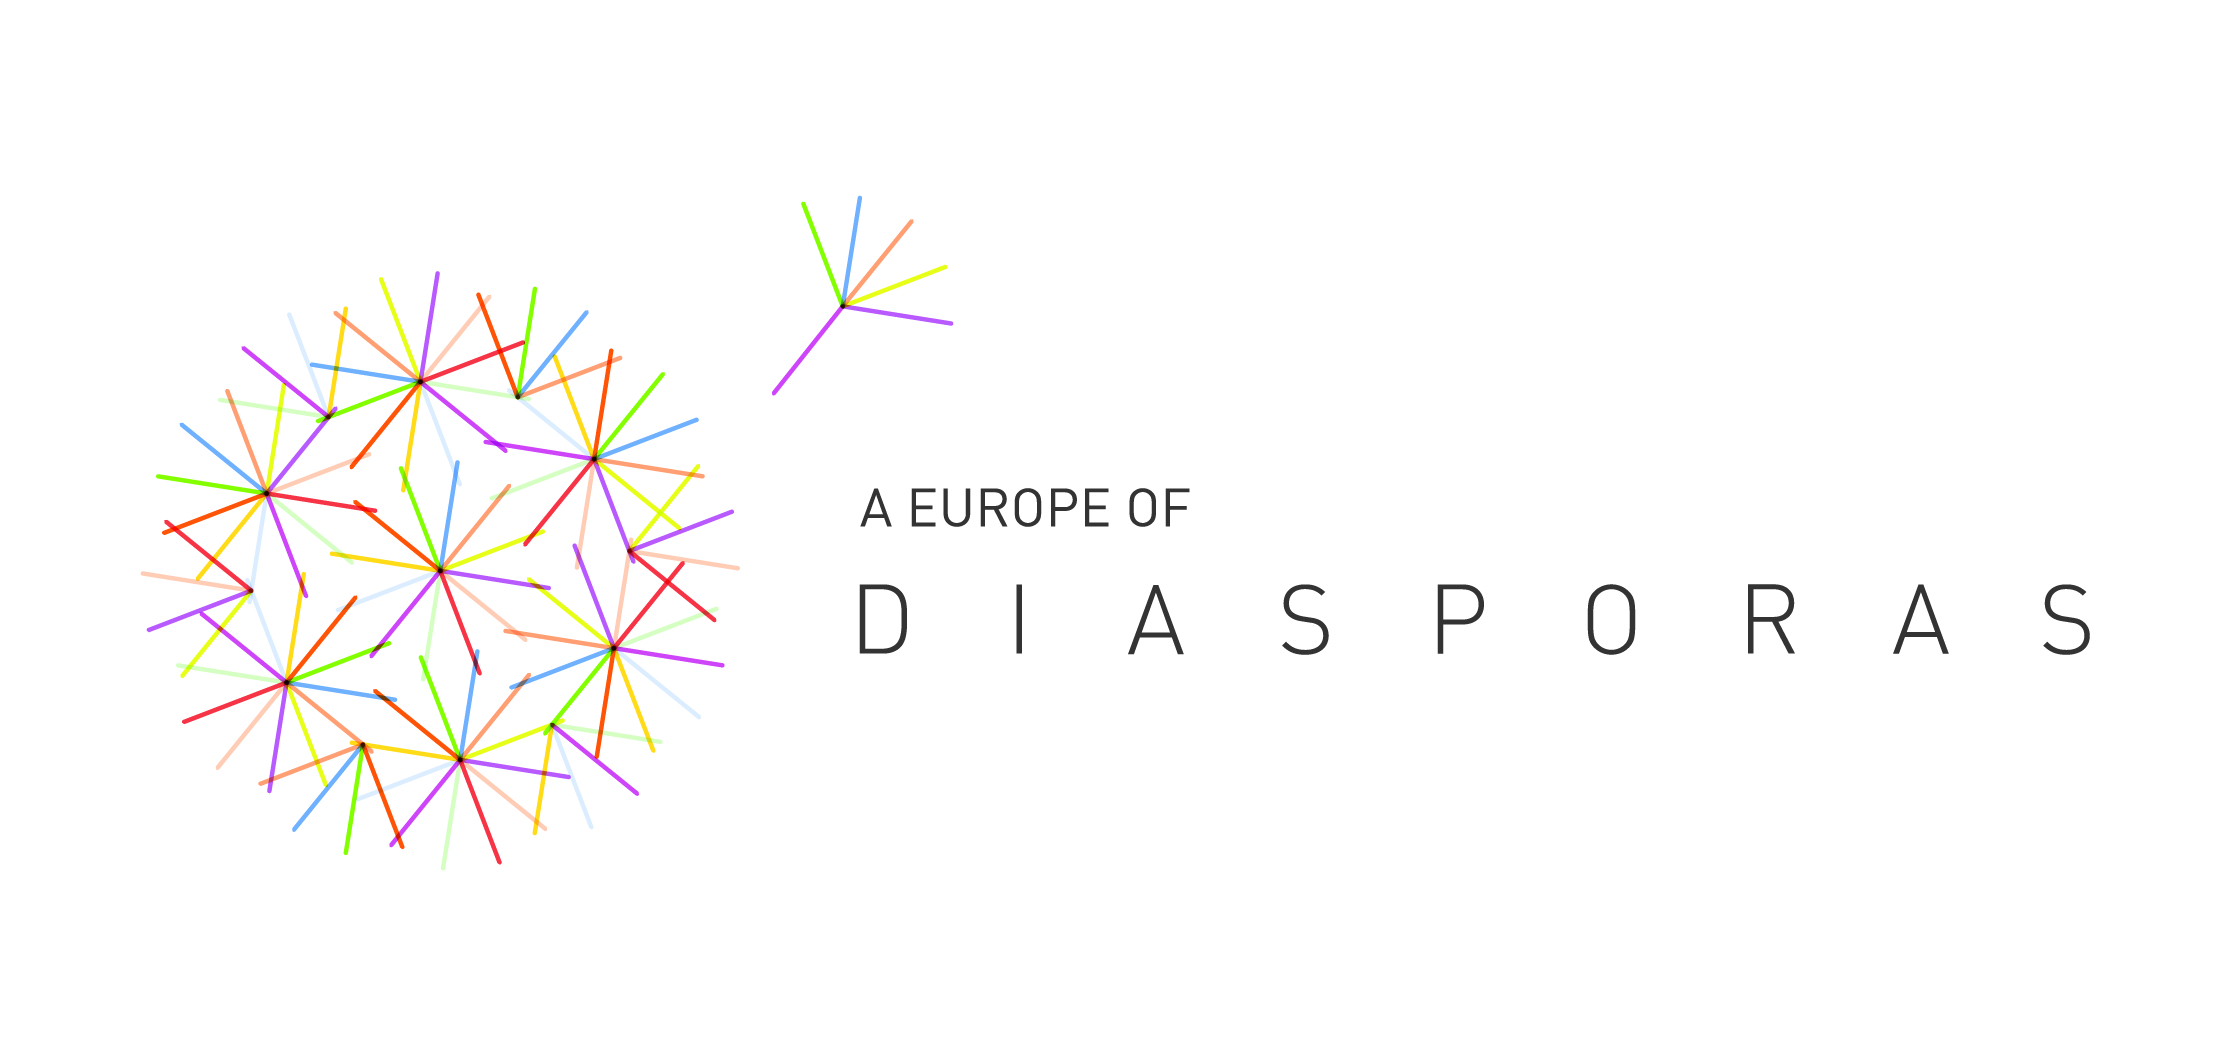 Conference “National and ethnic identity of diasporas in the public space” – Bucharest